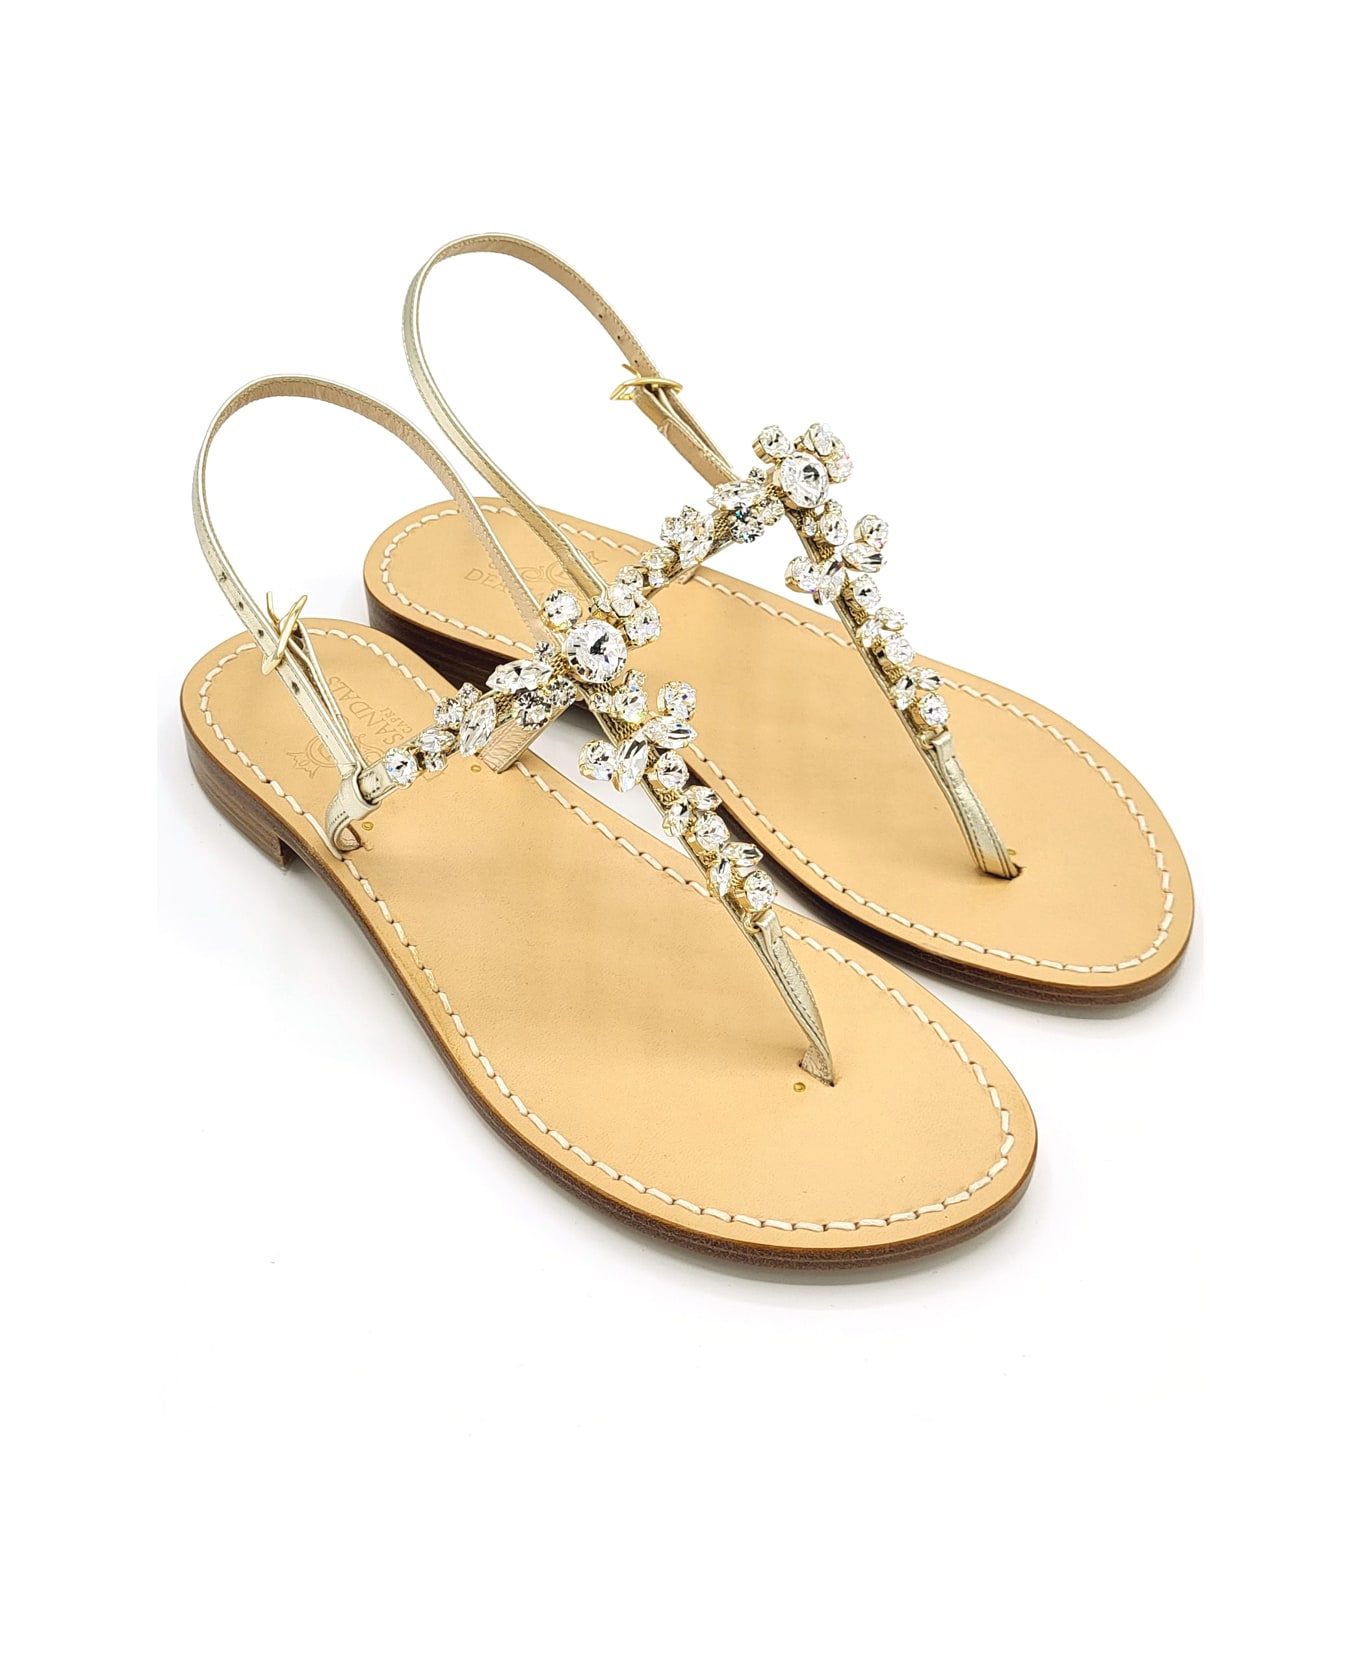 Dea Sandals Scopolo Jewel Thong Sandals - gold, crystal